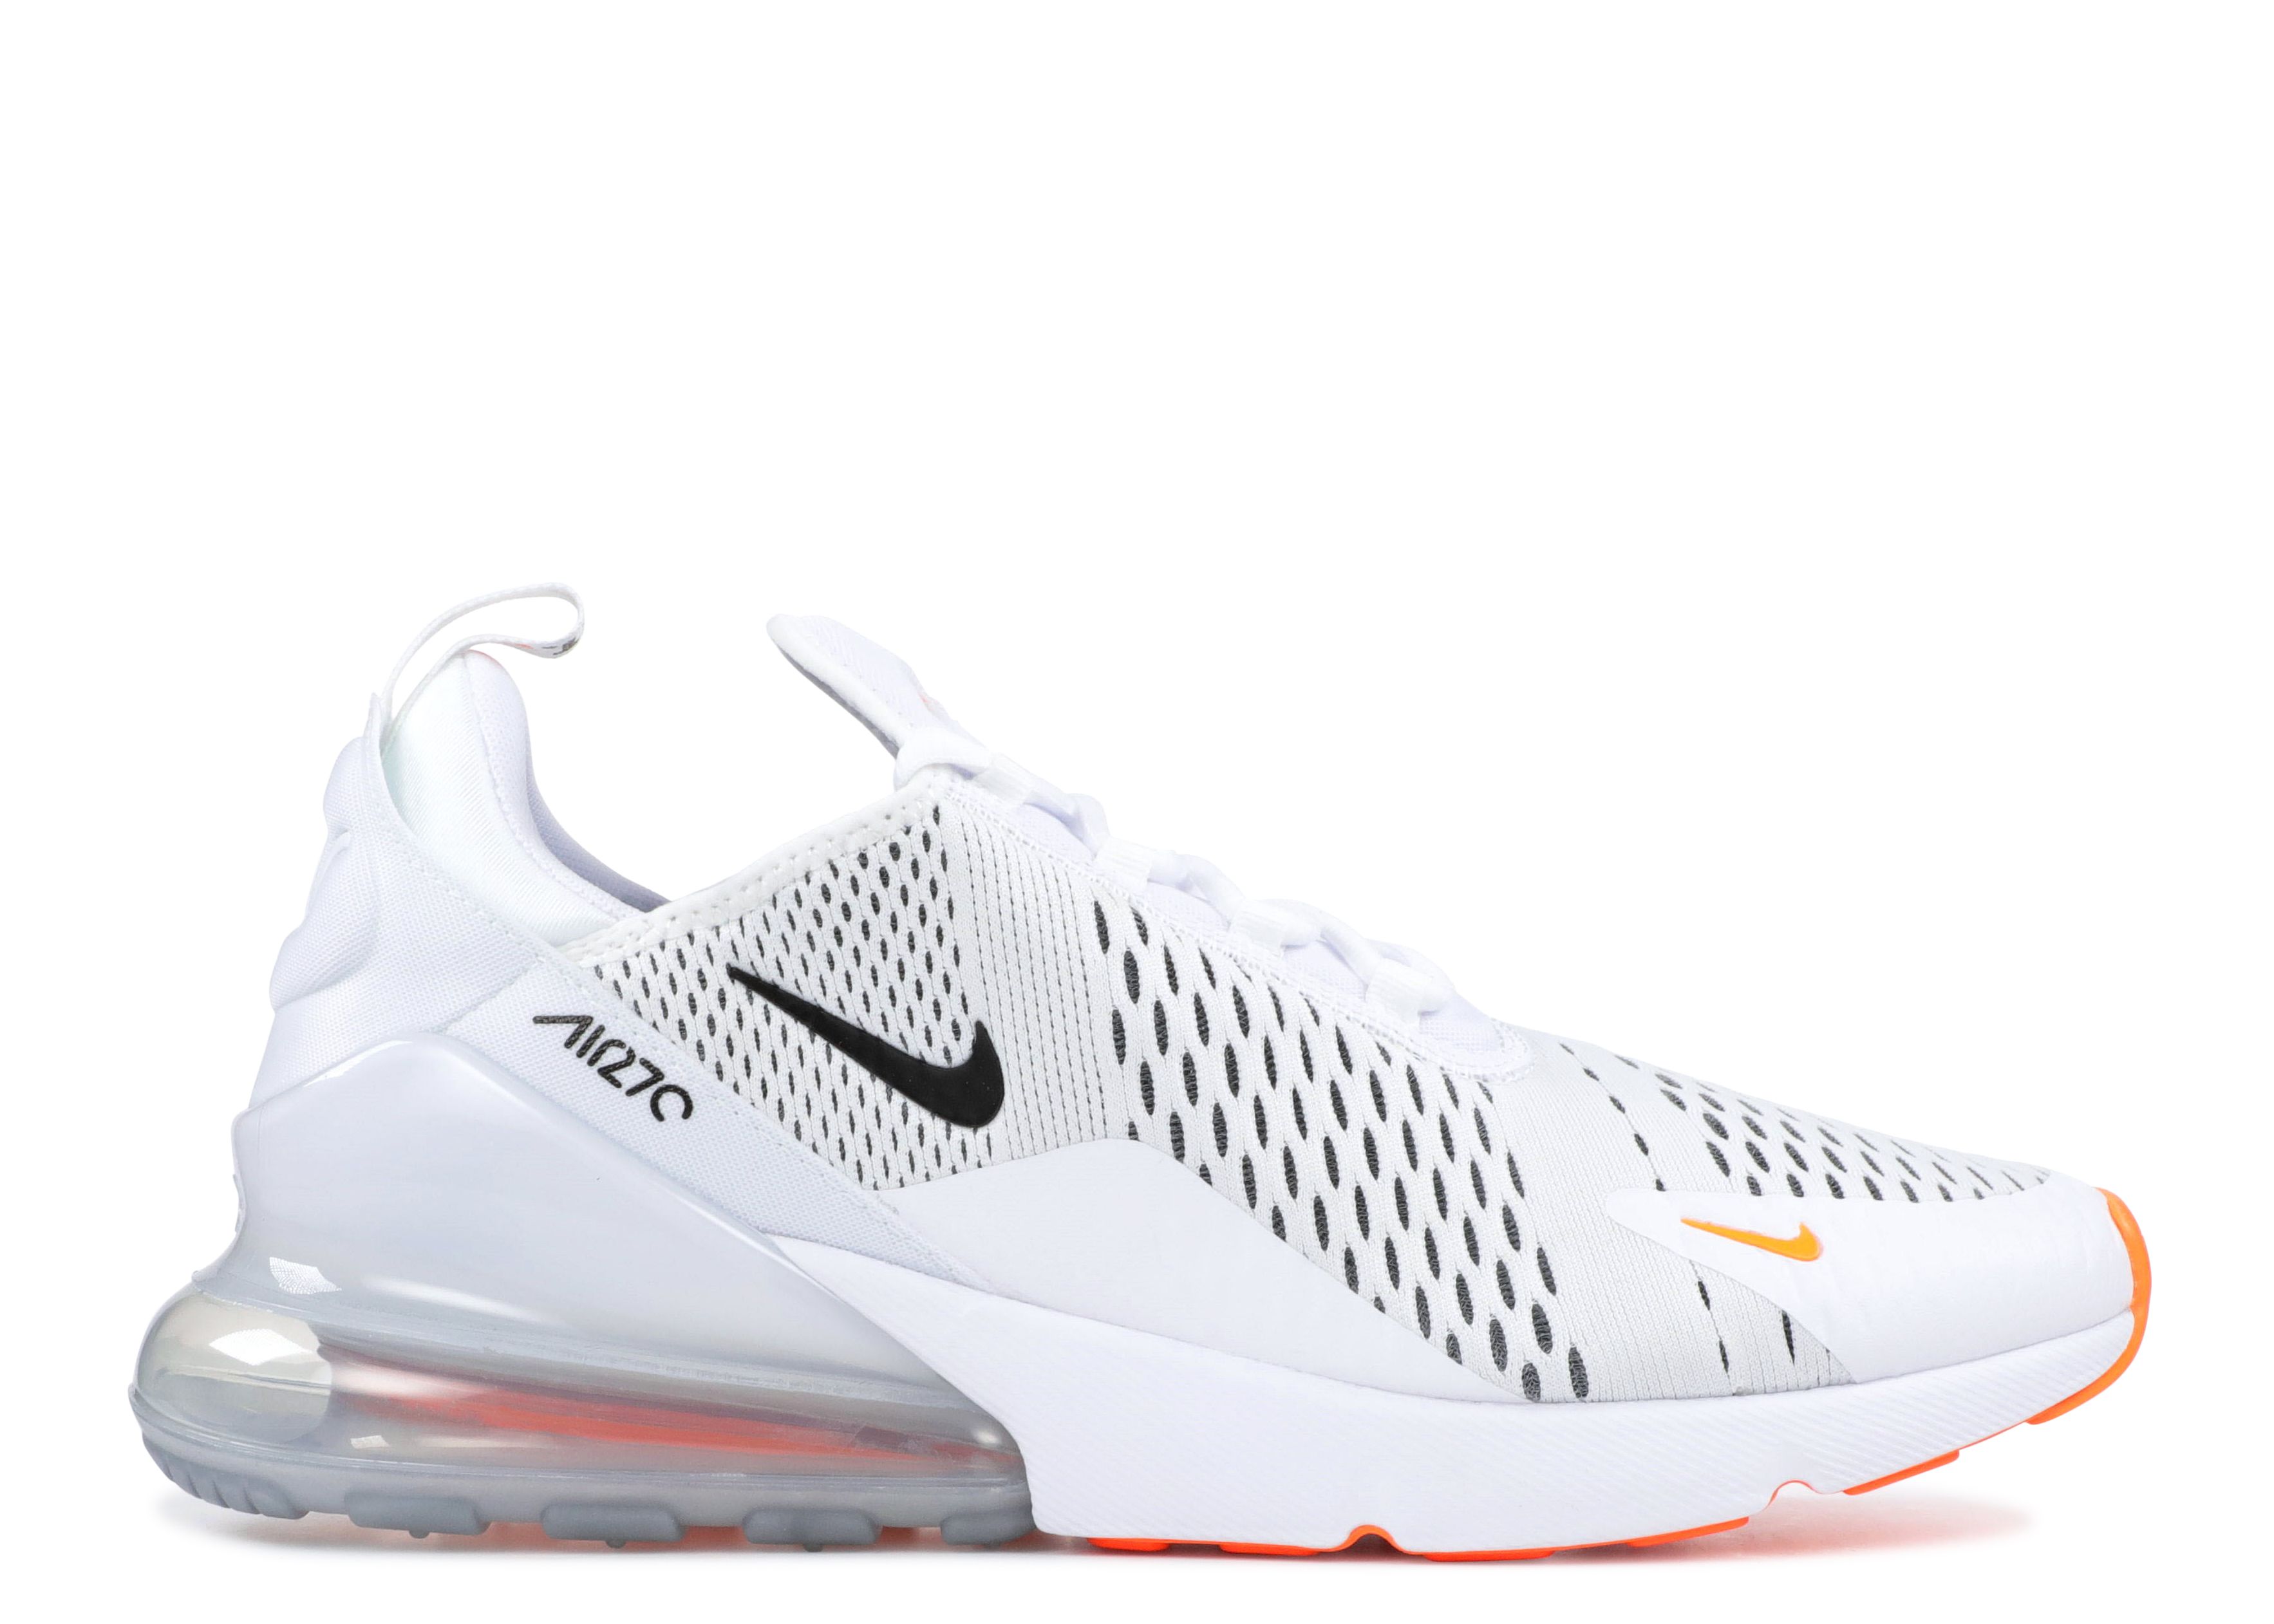 Кроссовки Nike Air Max 270 'Just Do It', белый кроссовки nike react live just do it белый красный